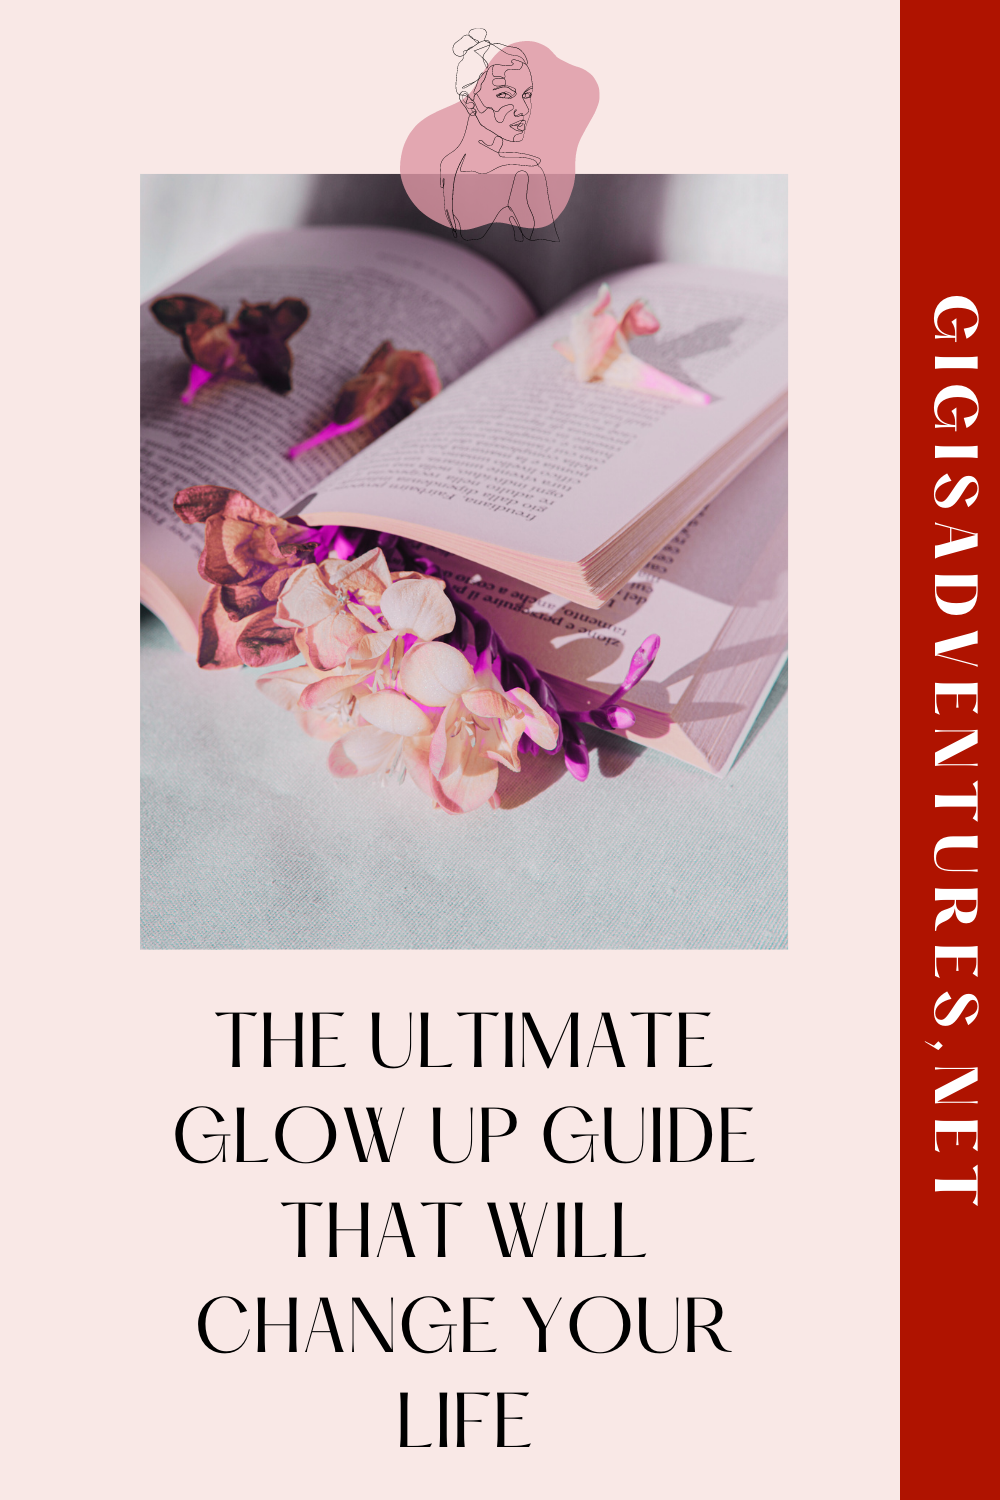 The Ultimate Glow Up Guide That Will Change Your Life | How To Become That Girl